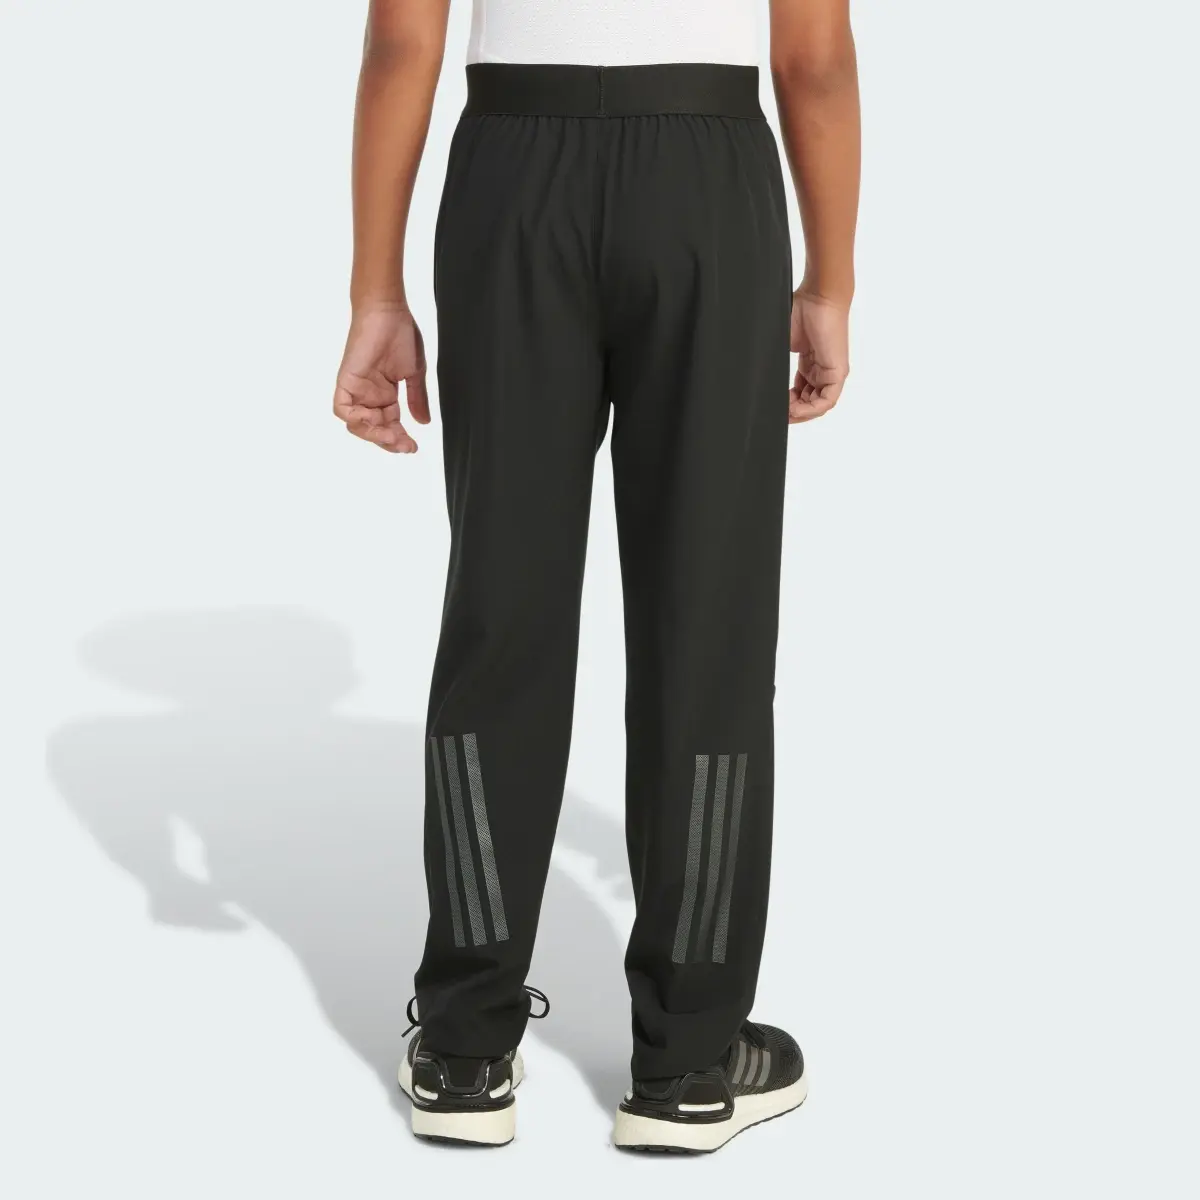 Adidas Designed for Training Stretch Woven Pants. 2